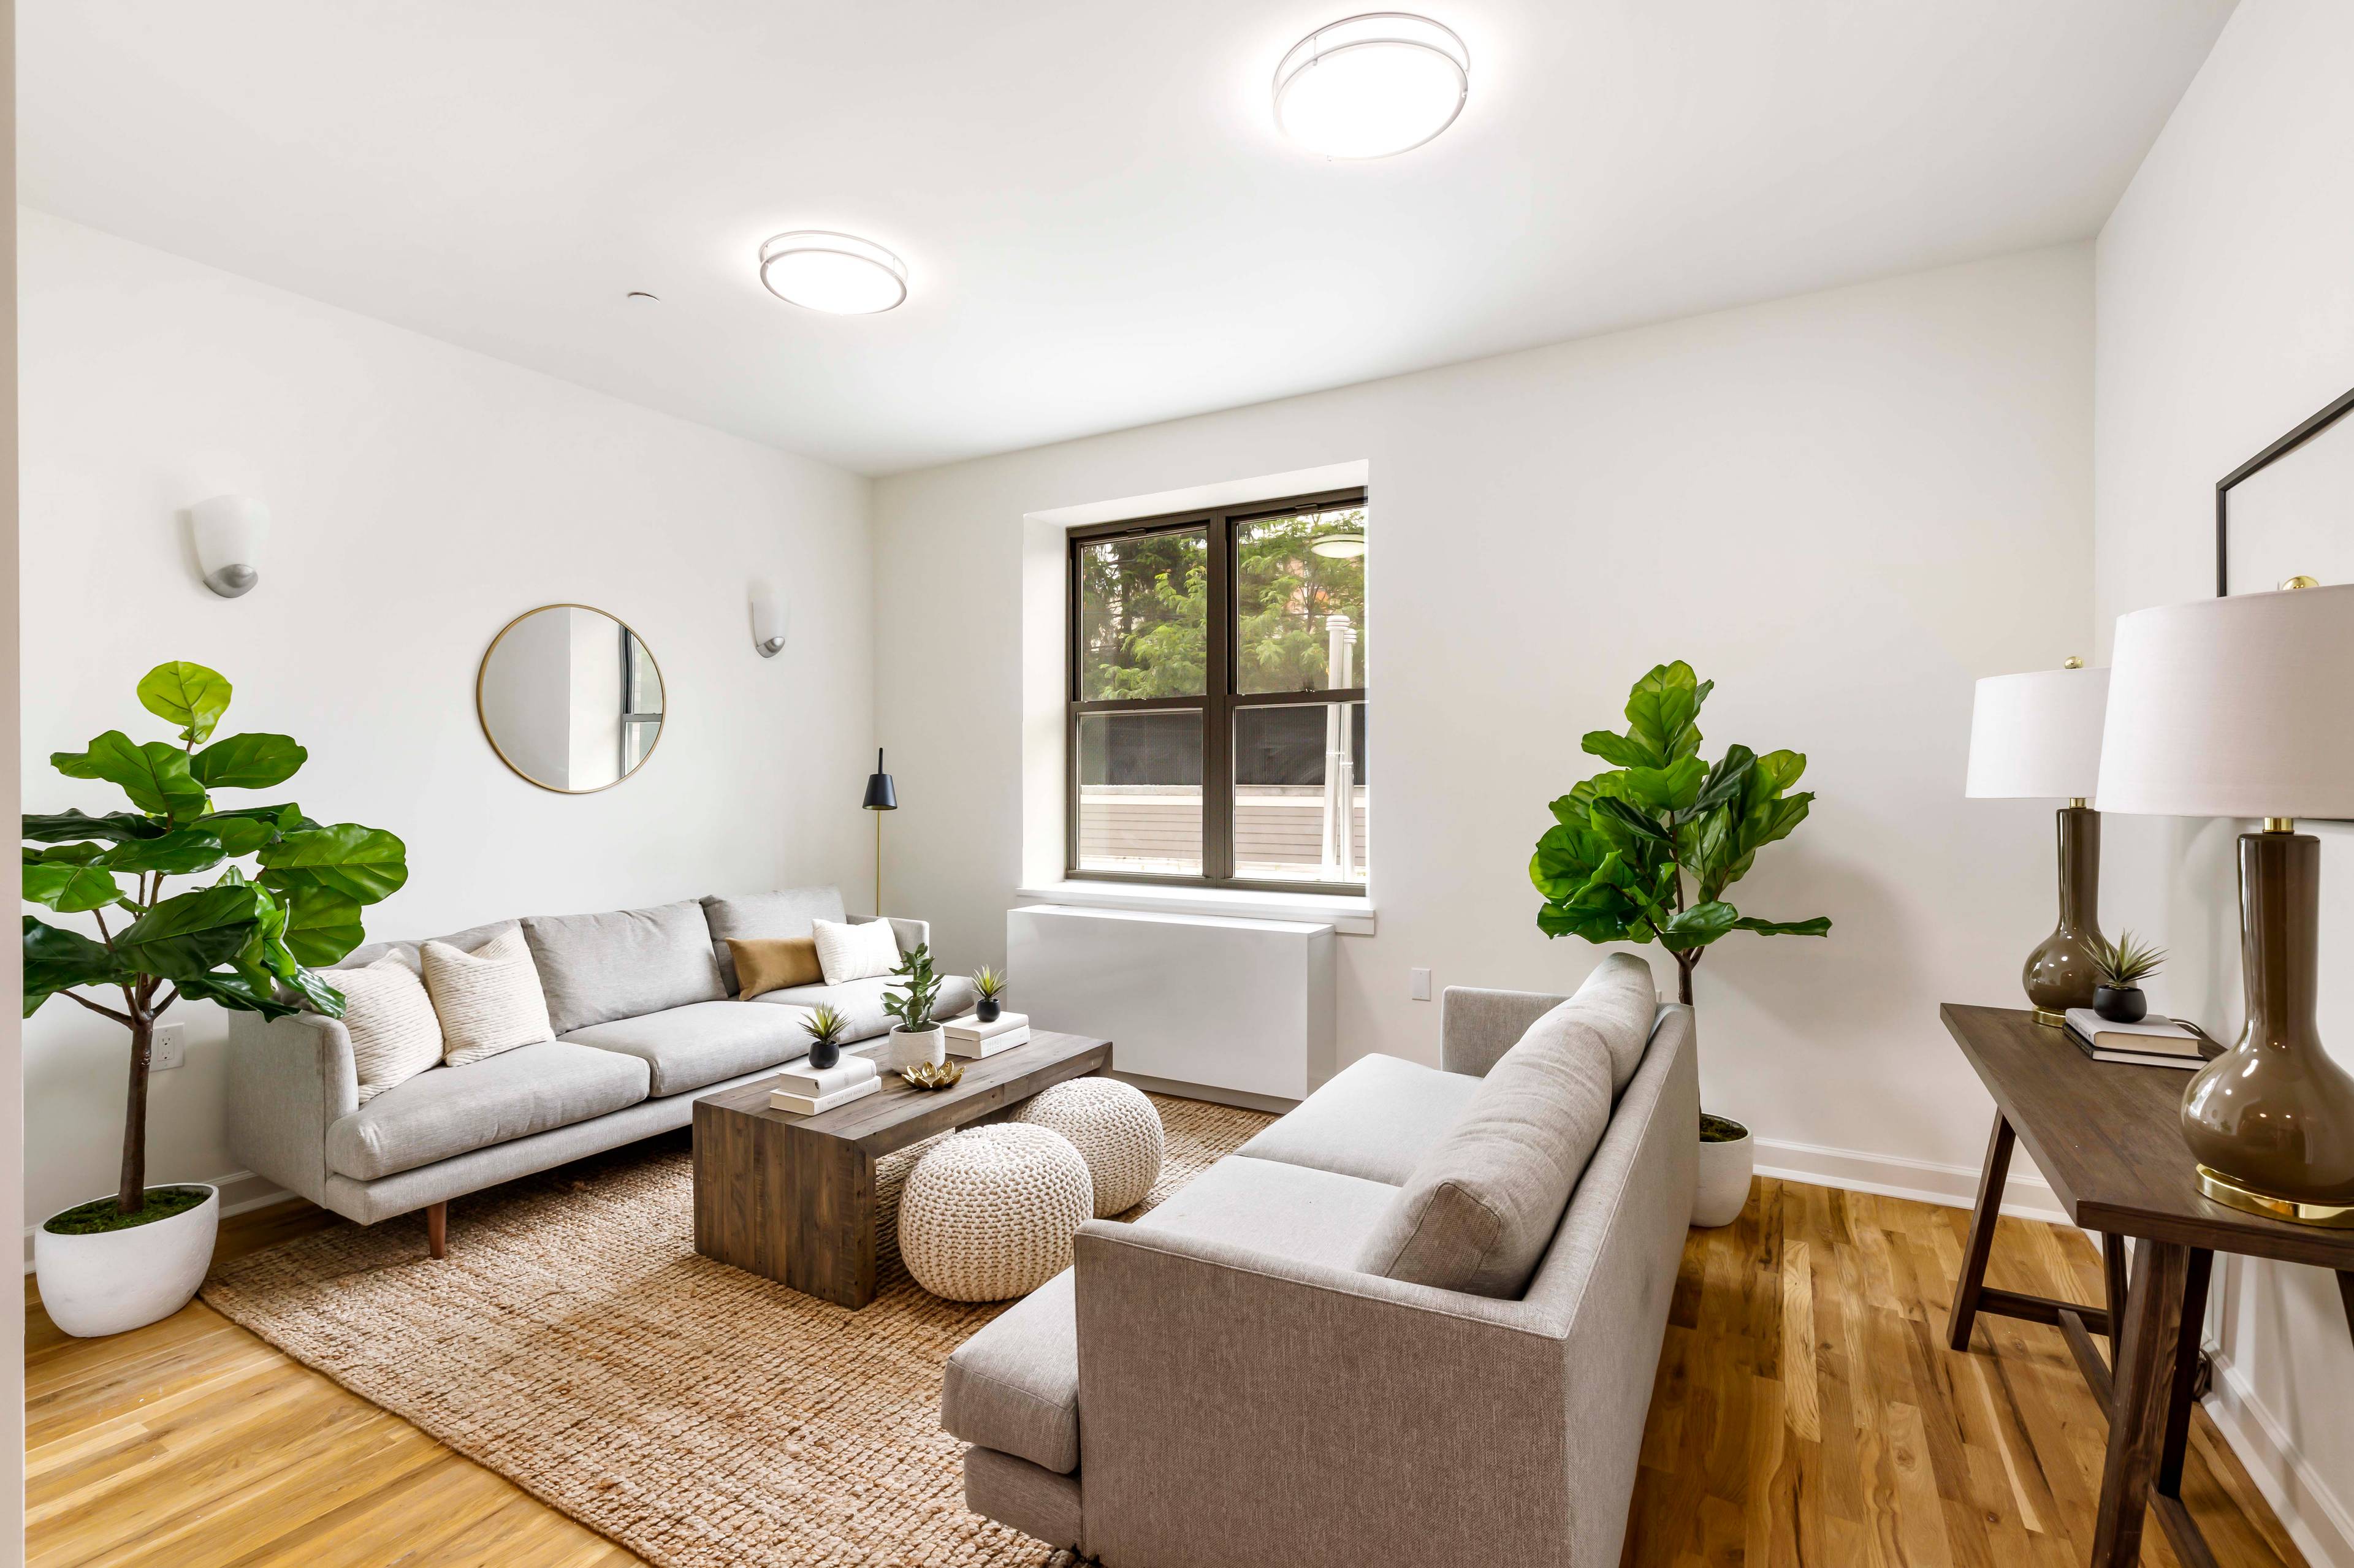 Walk into unit 2E at the luxurious Brooklyn Manor, and you are immediately greeted with amazing natural light, beautiful finishes, and spacious living areas.